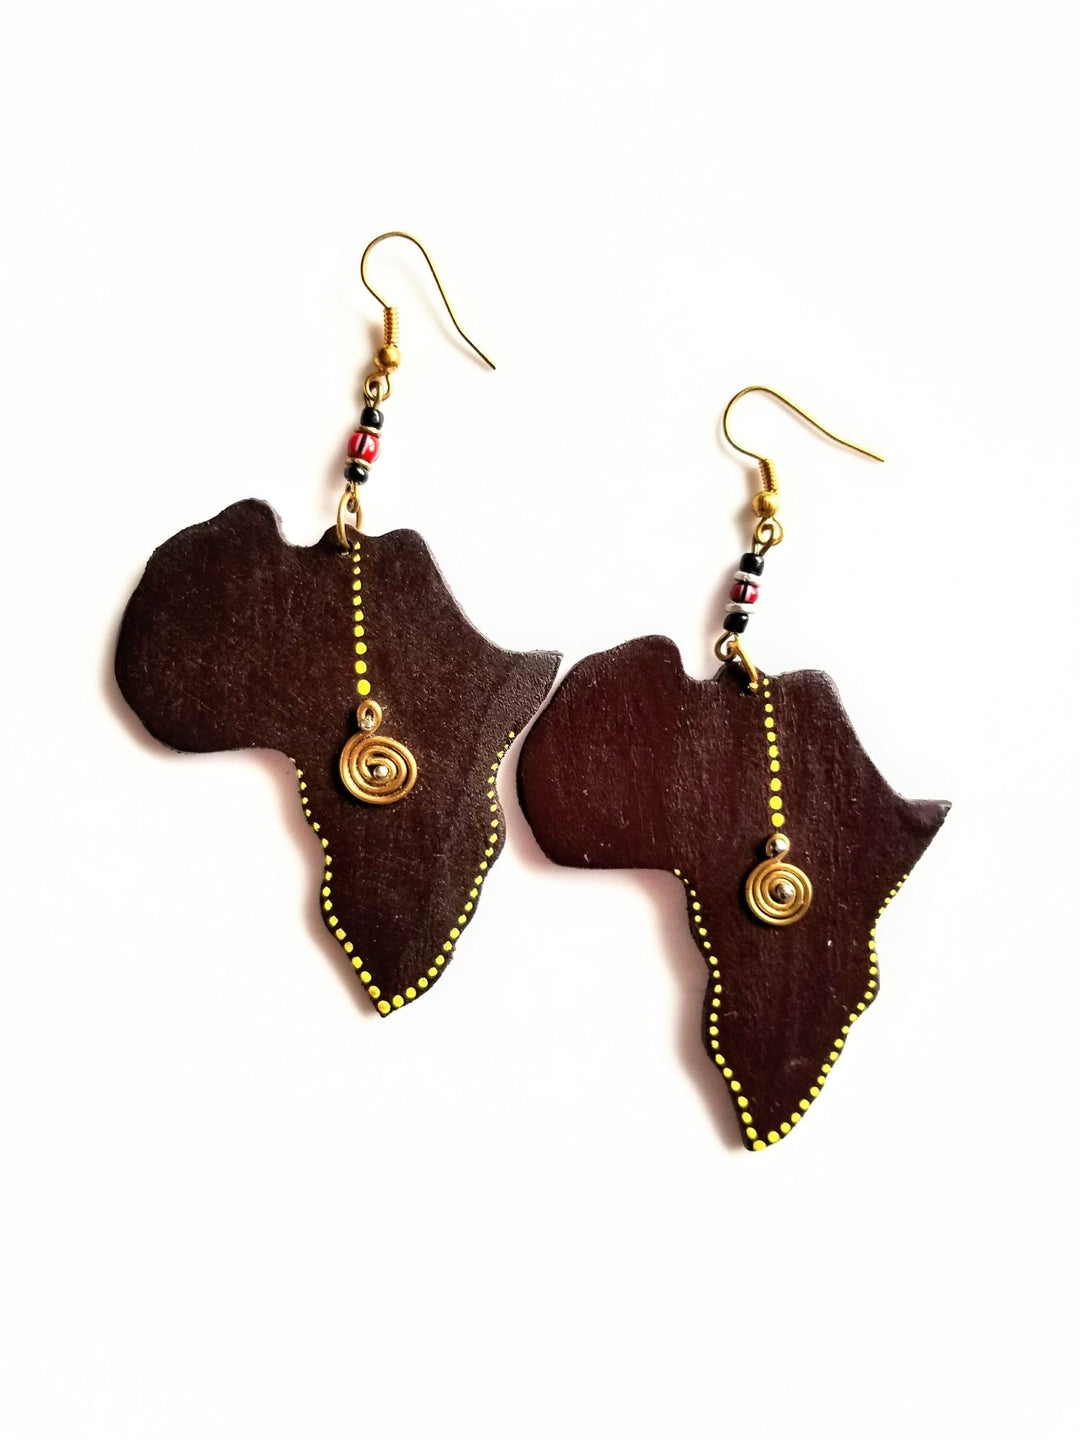 Kiva Store  Sese Wood Coconut Shell and Plastic Earrings from Ghana -  African Monolith